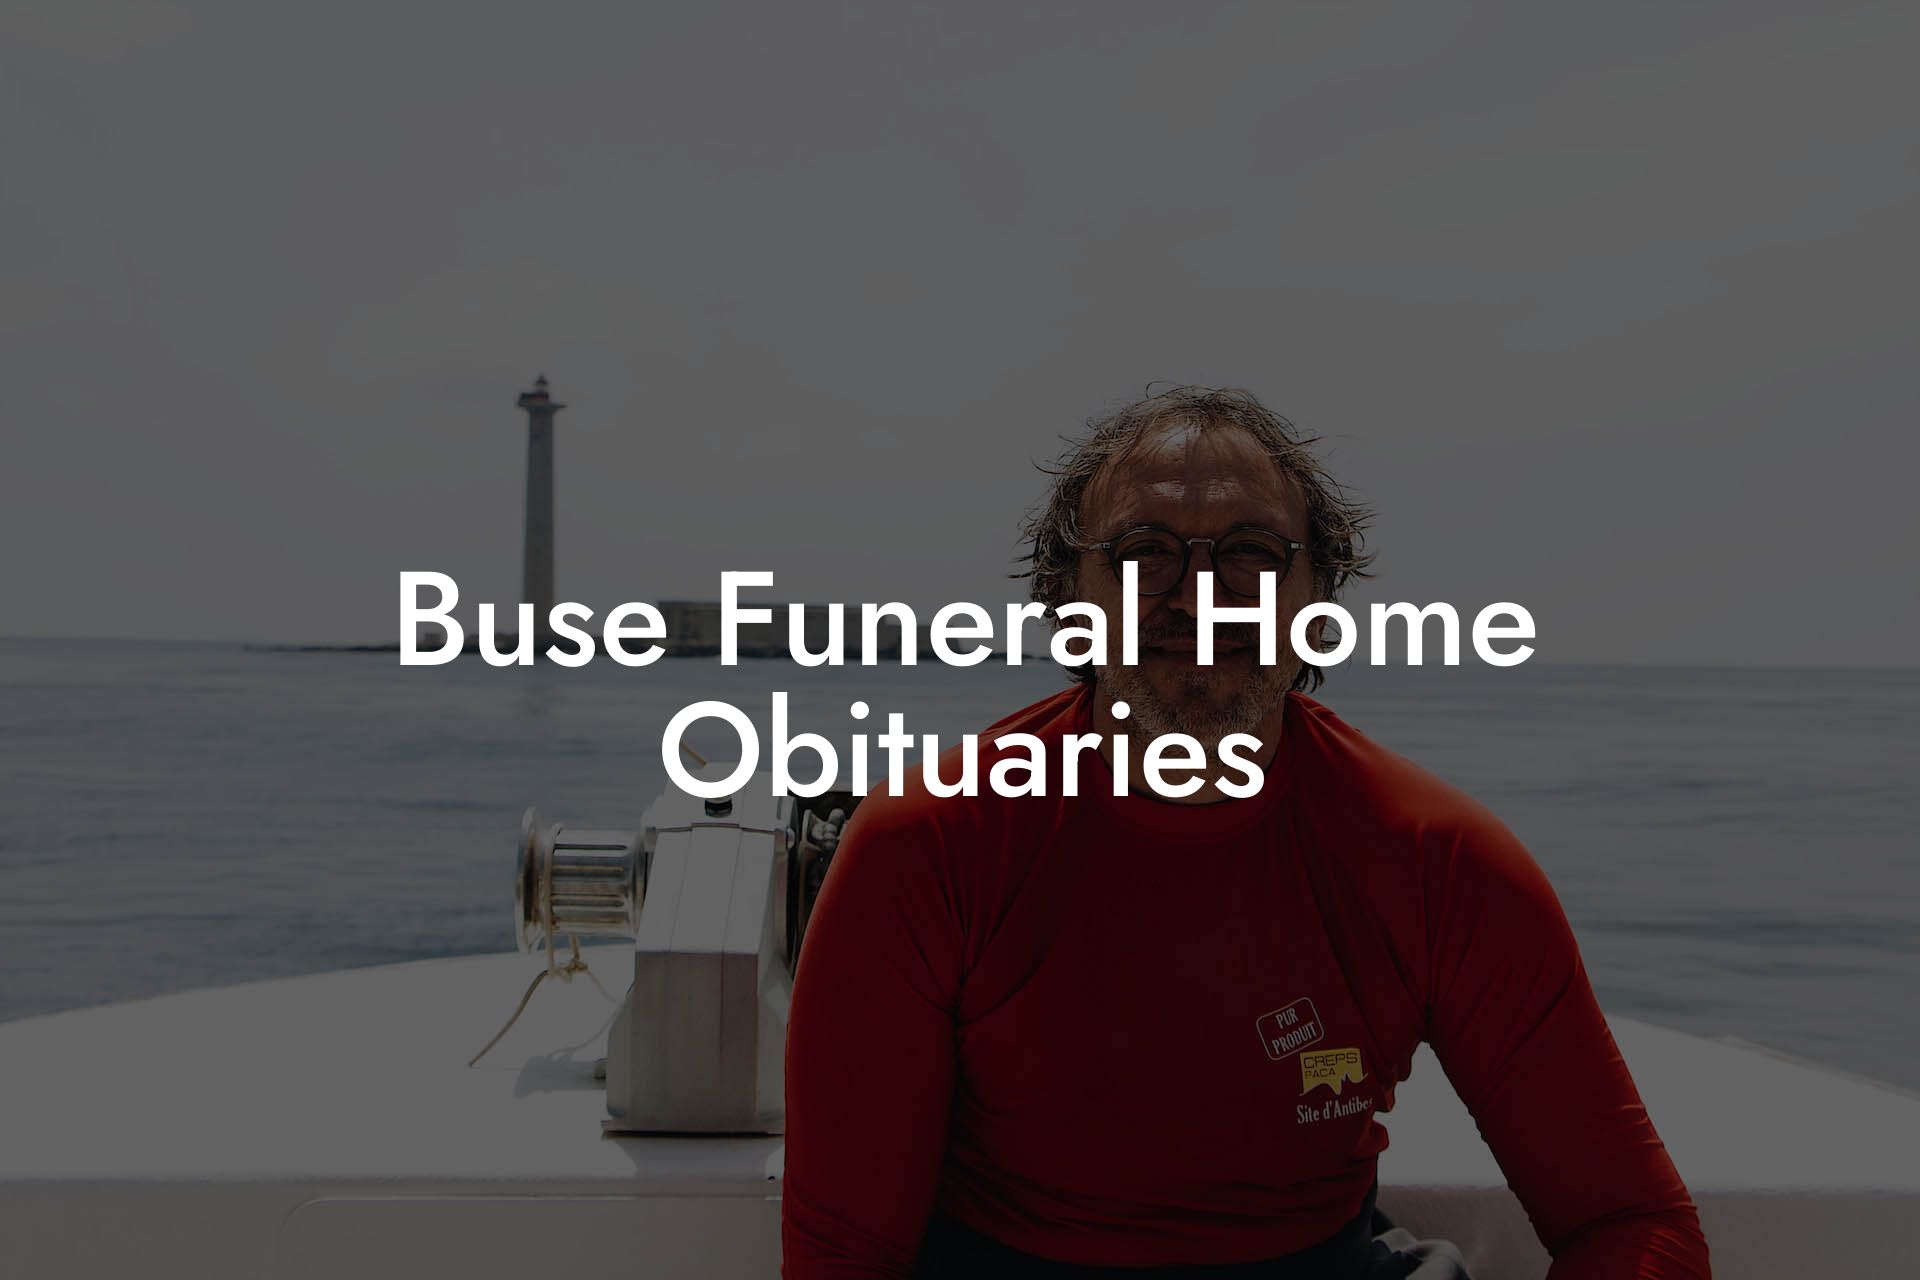 Buse Funeral Home Obituaries